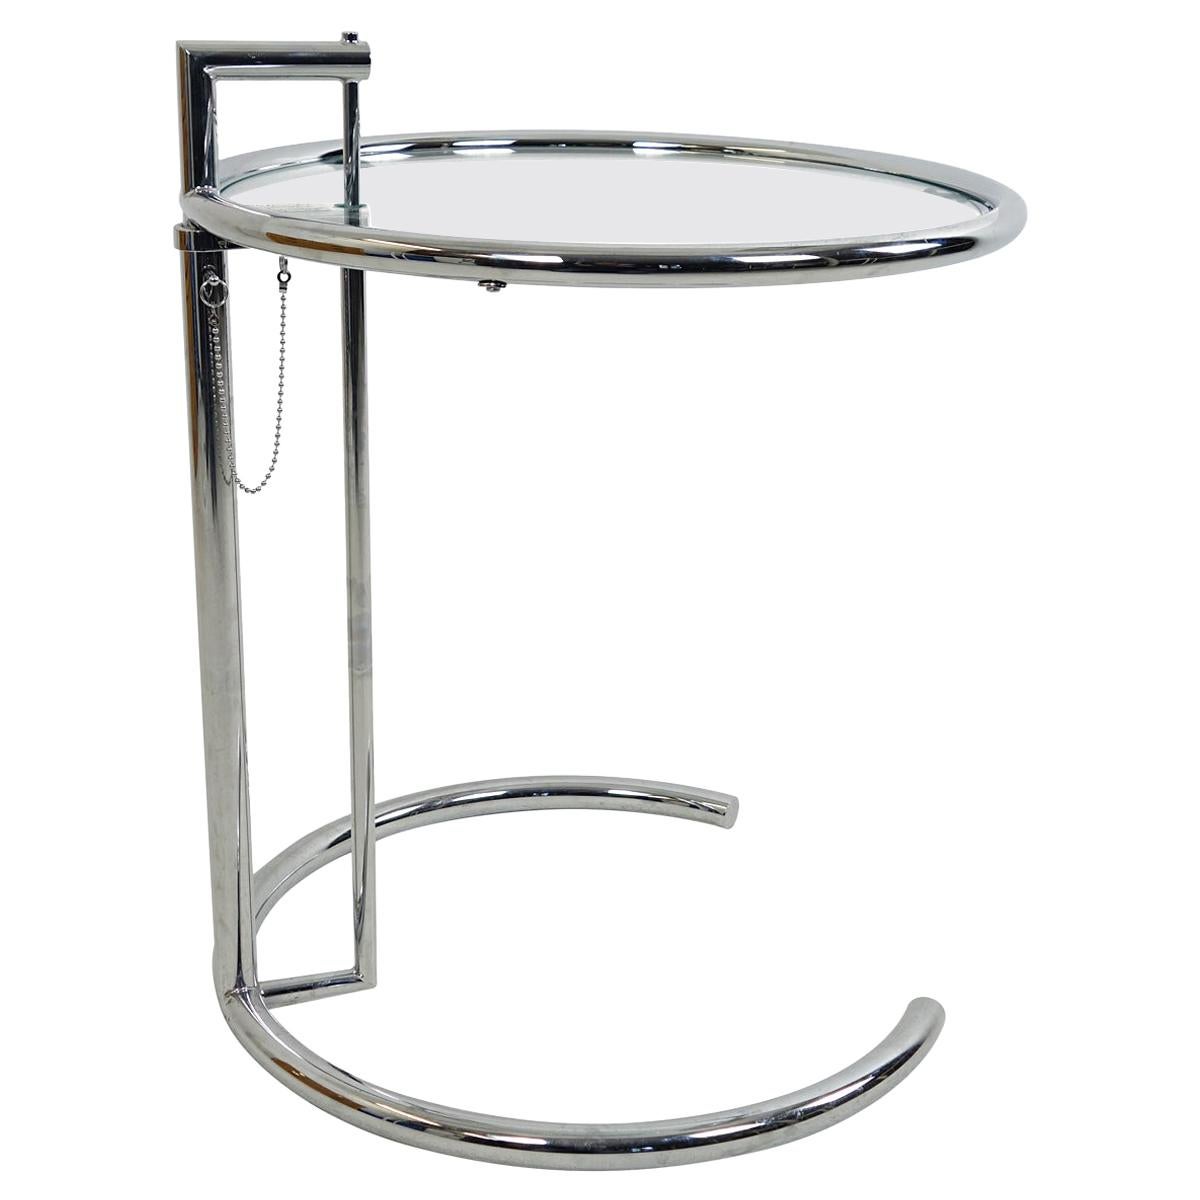 Modernist Chrome Tubular Side Table E1027 by Eileen Gray for Classicon